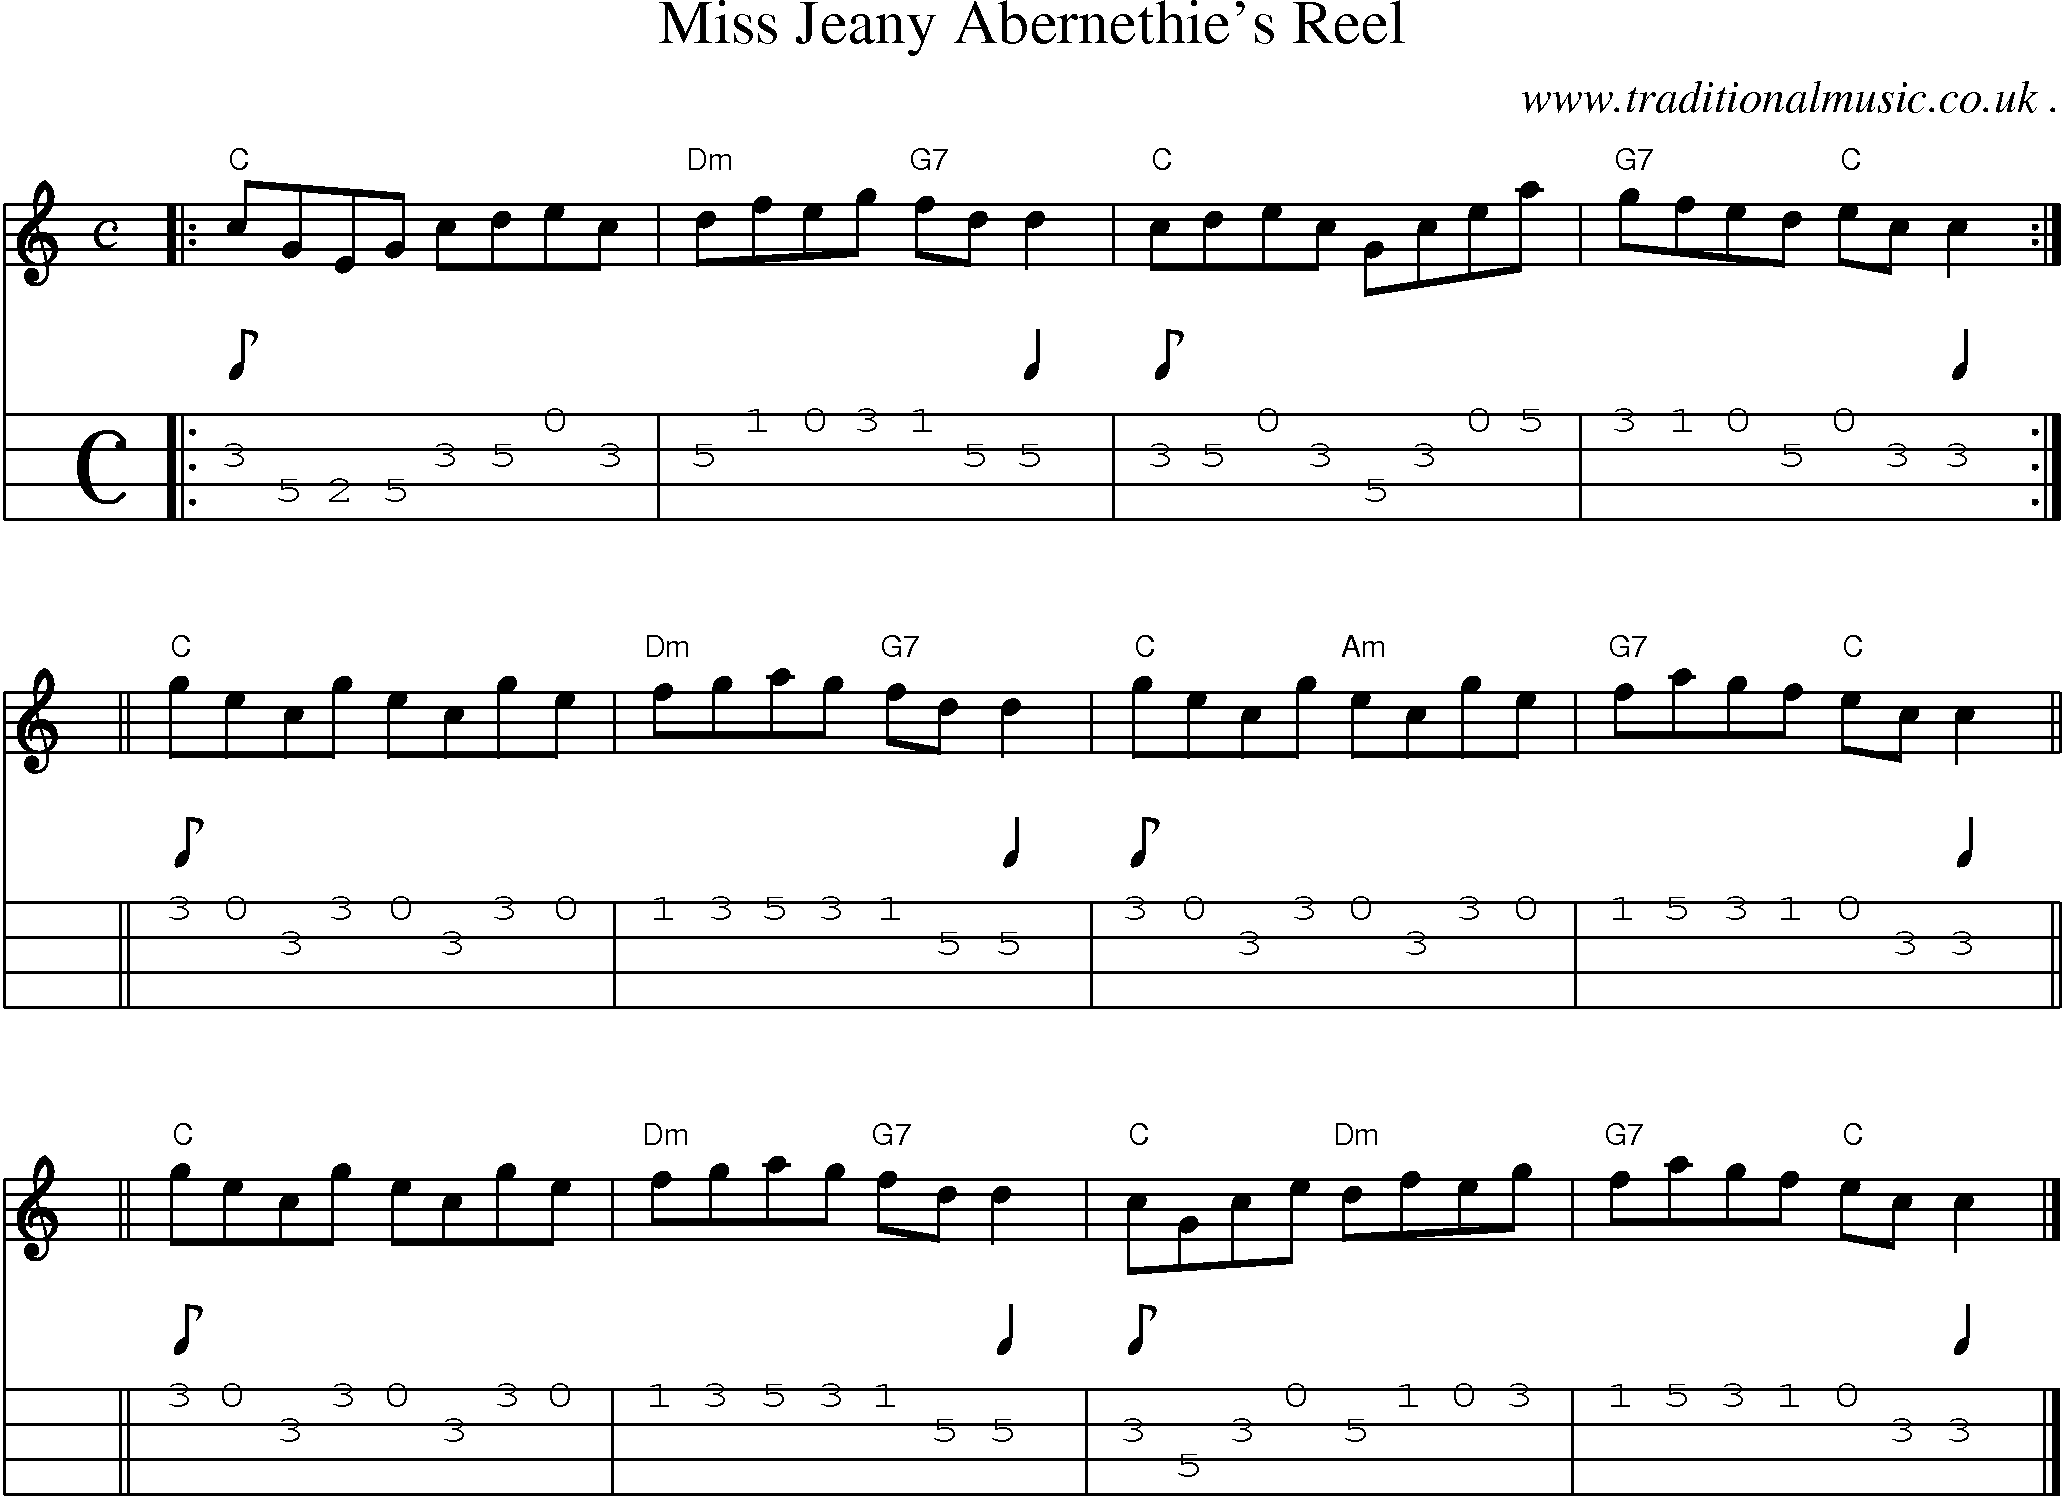 Sheet-music  score, Chords and Mandolin Tabs for Miss Jeany Abernethies Reel